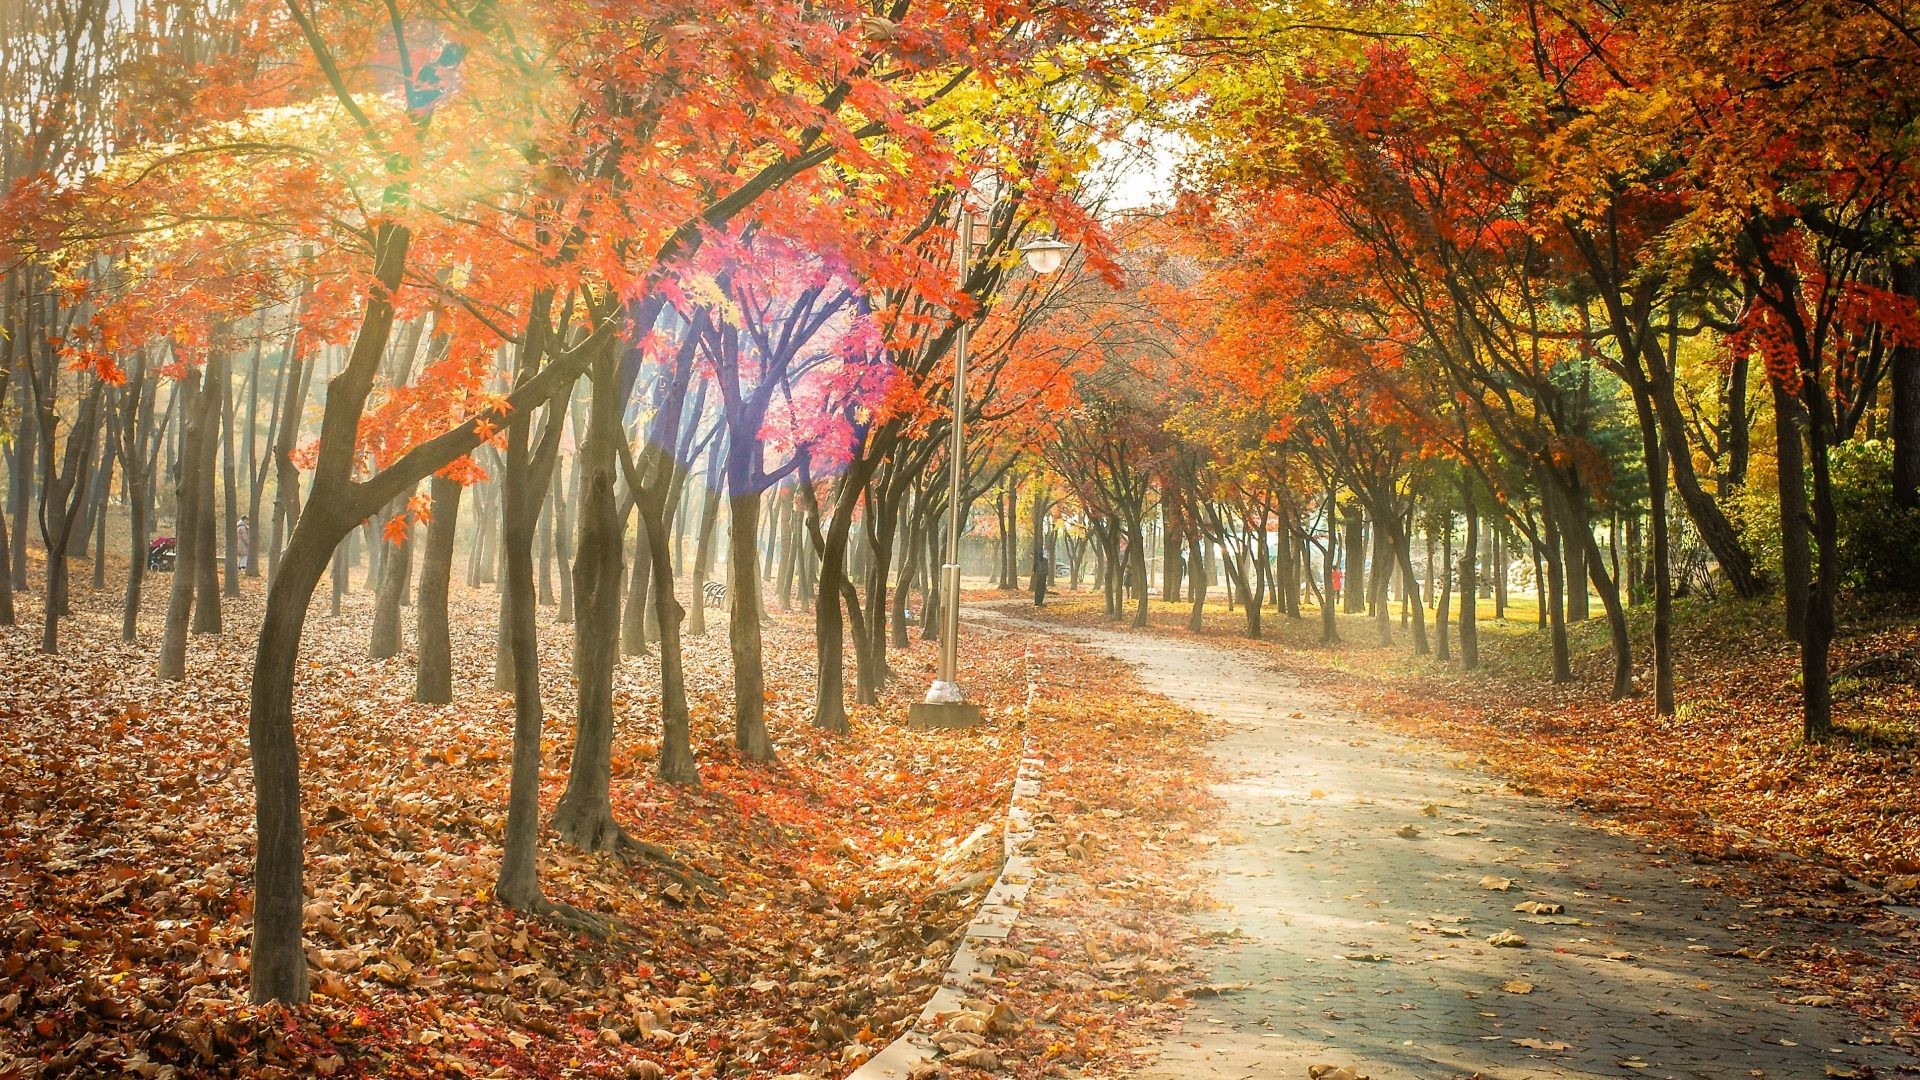 1920x1080 Leaves Tag - Trail Tree Leaves Fall Landscape Leaf Road Nature Autumn Forest  Path Best Picture